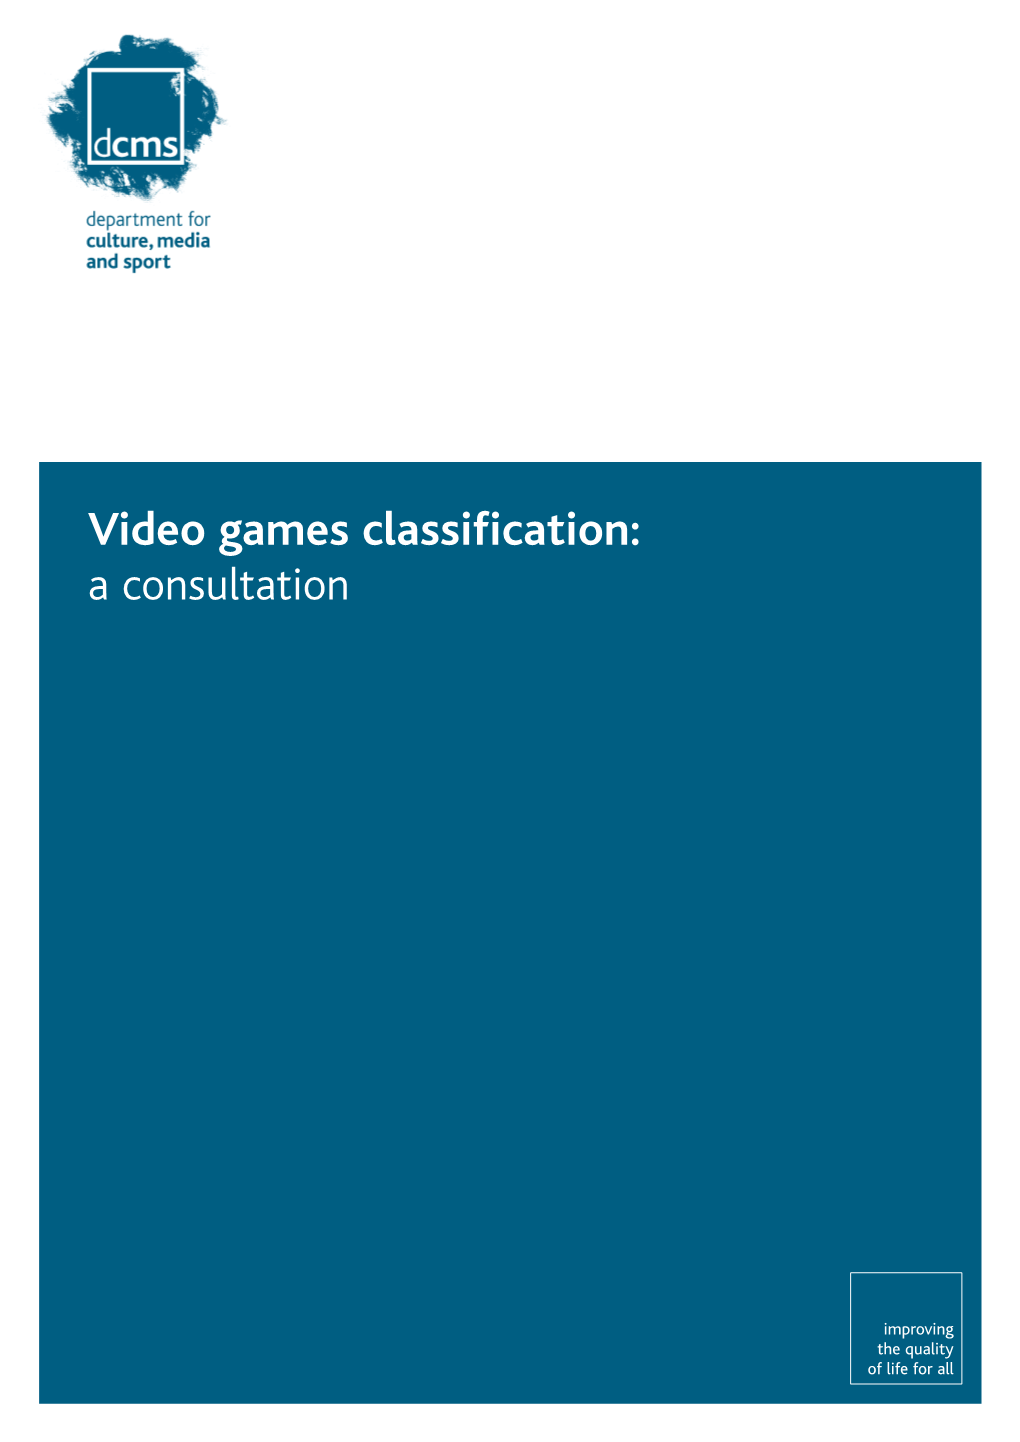 Video Games Classification: a Consultation